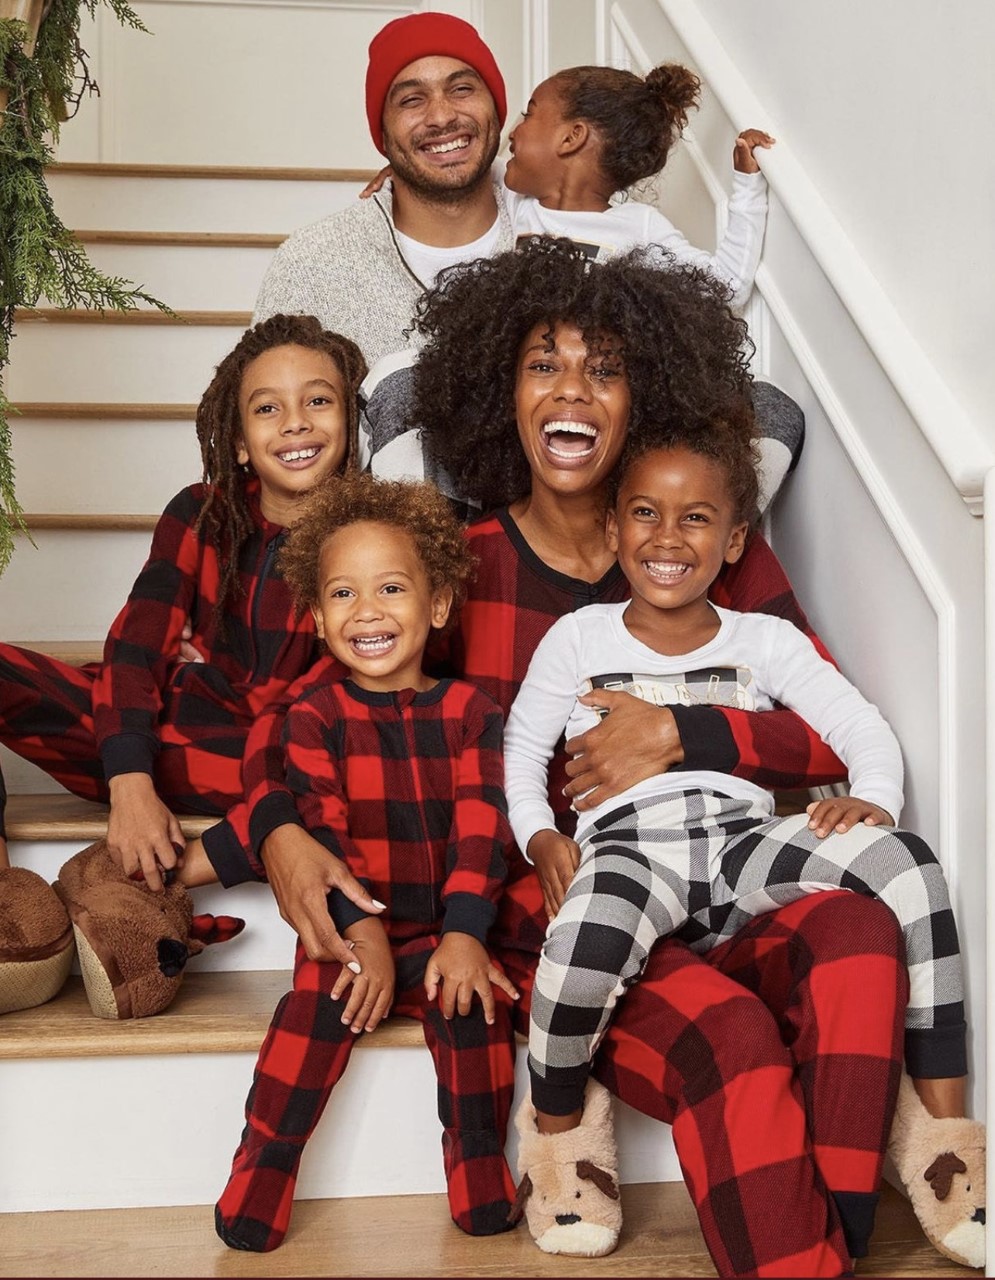 Matching plaid set family from Old Navy